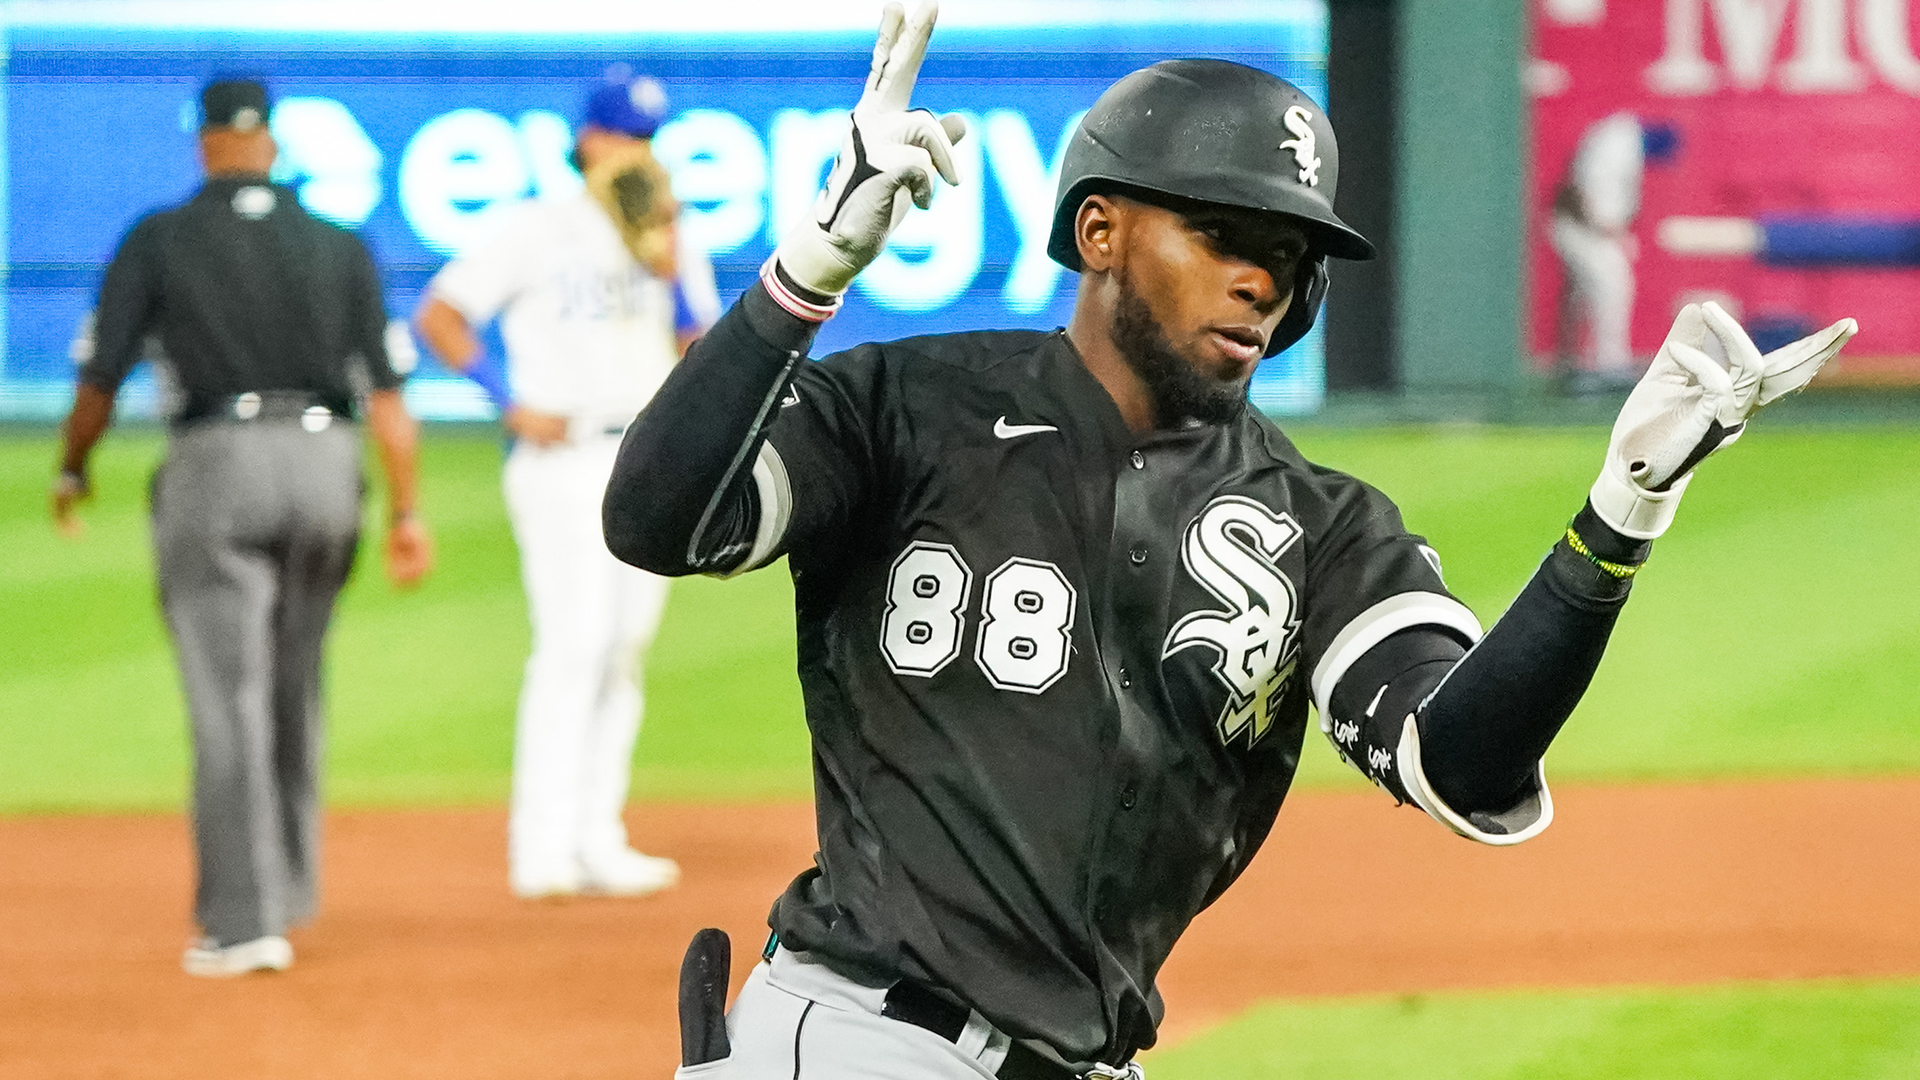 White Sox place OF Luis Robert Jr. (knee) on IL, ending his season